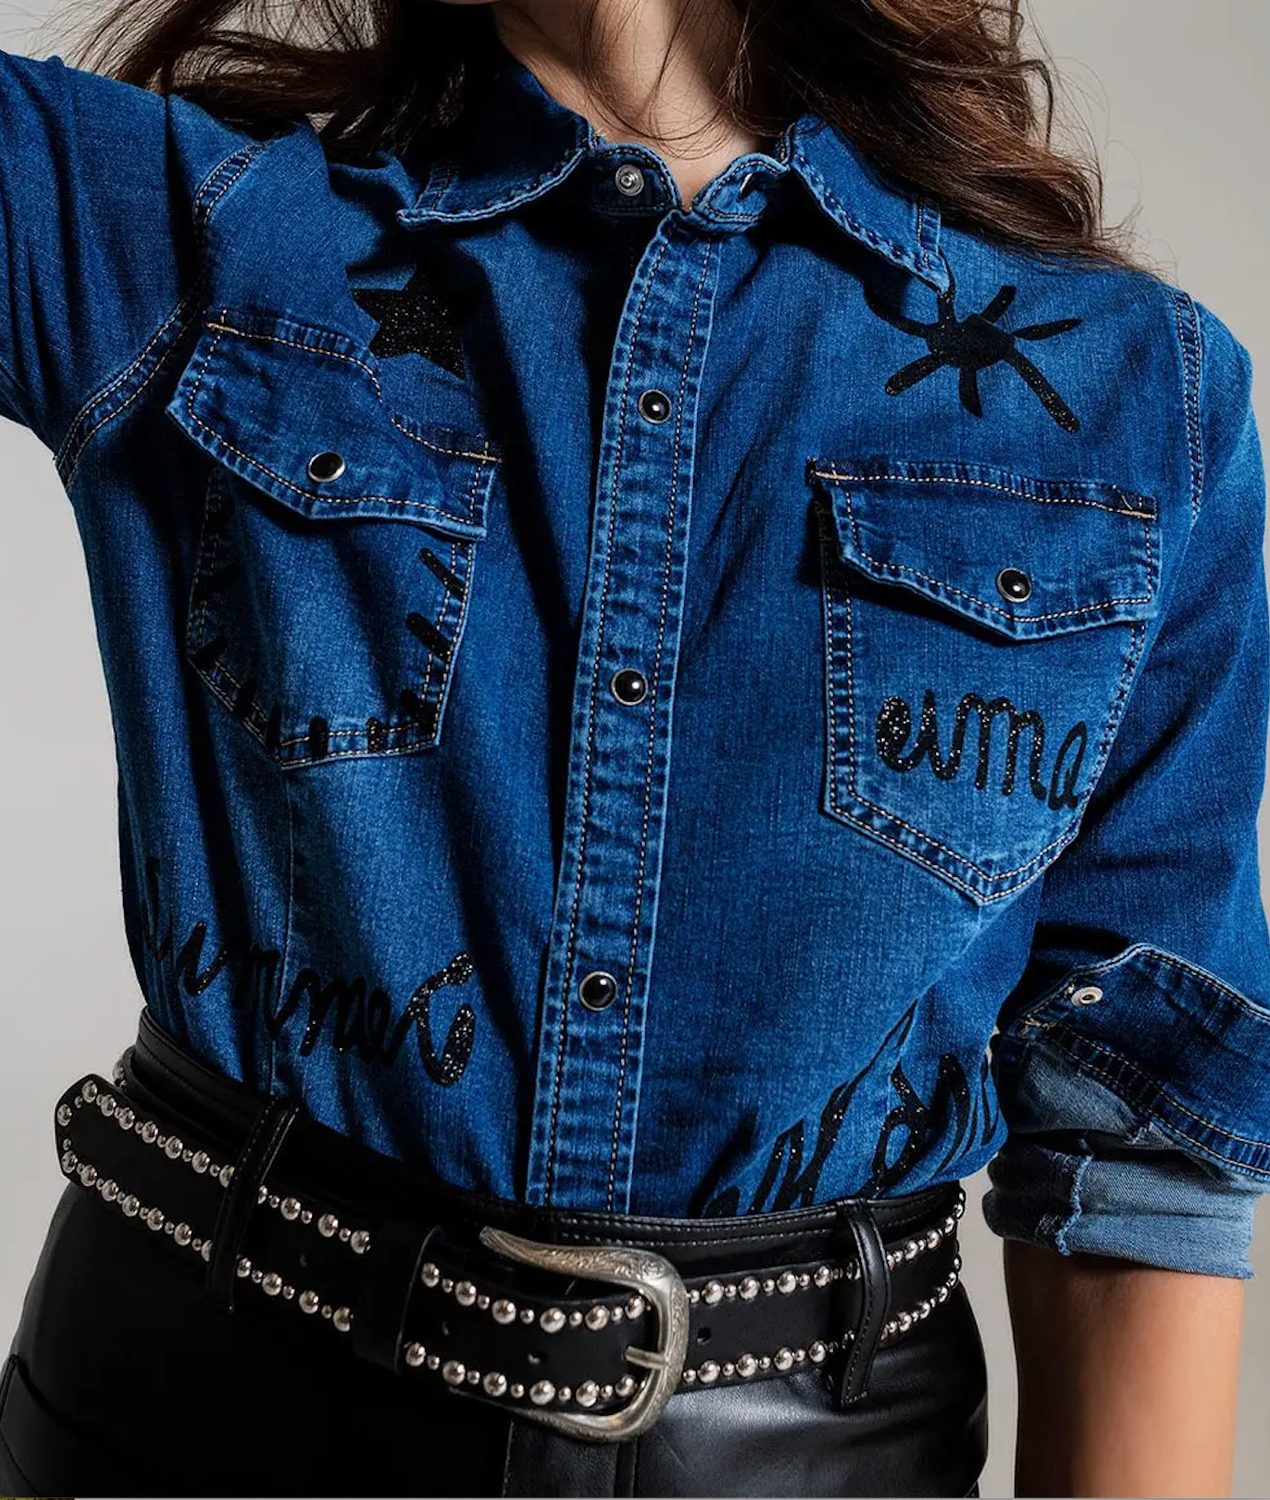 Strass Denim Top, Choose size: Small